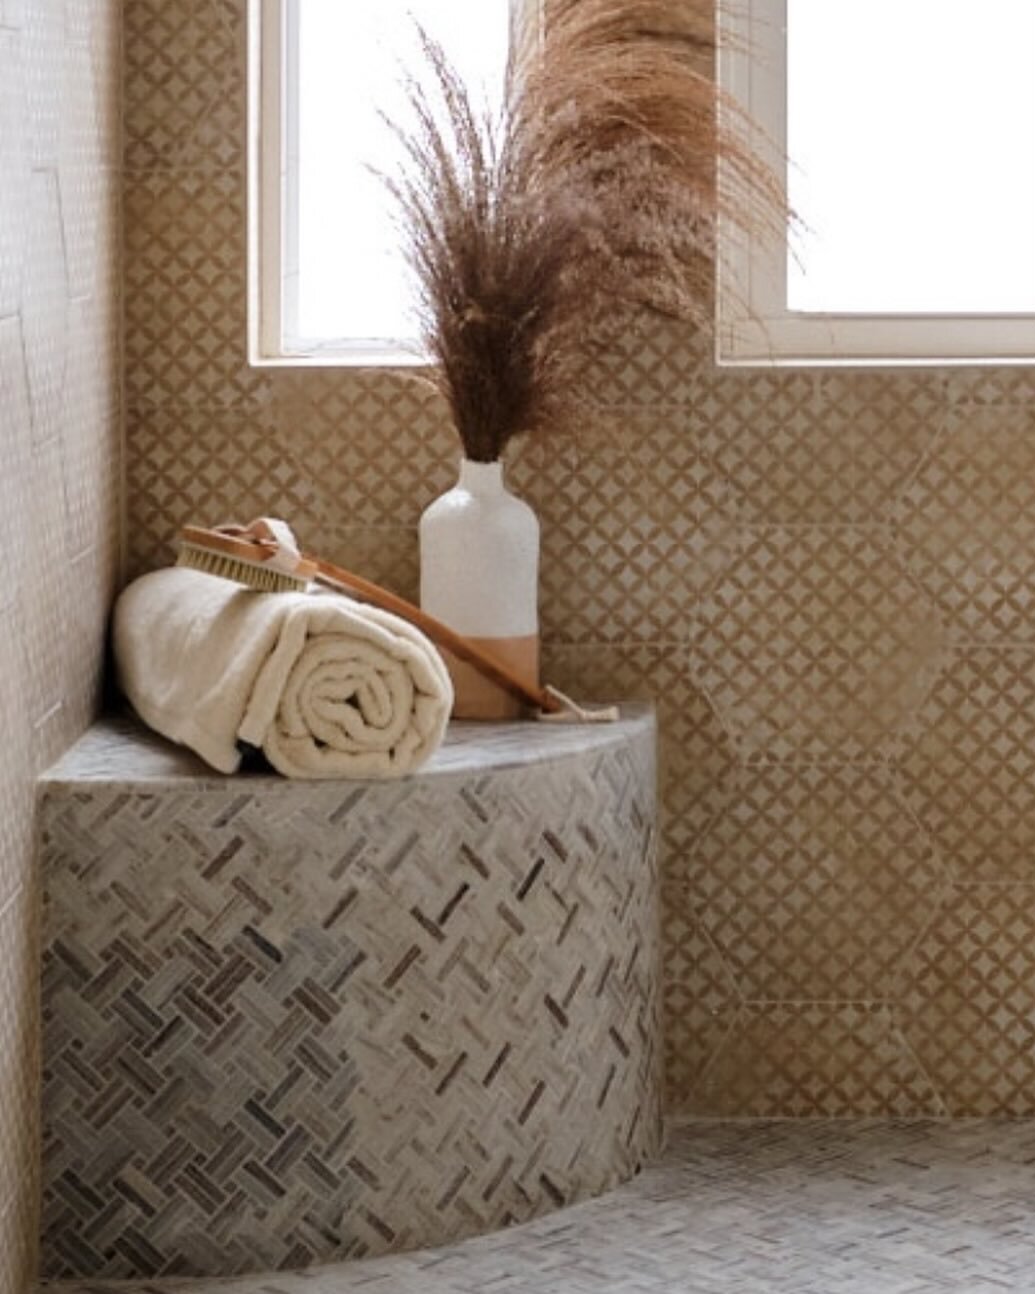 When your client&rsquo;s primary suite bathroom remodel makes you wish you lived there ❤️ The tile combinations make me have all the cozy earth tone feels that I adore! More photos coming soon! #primarybathroom #bathroomremodel #ruthiestaalseninterio